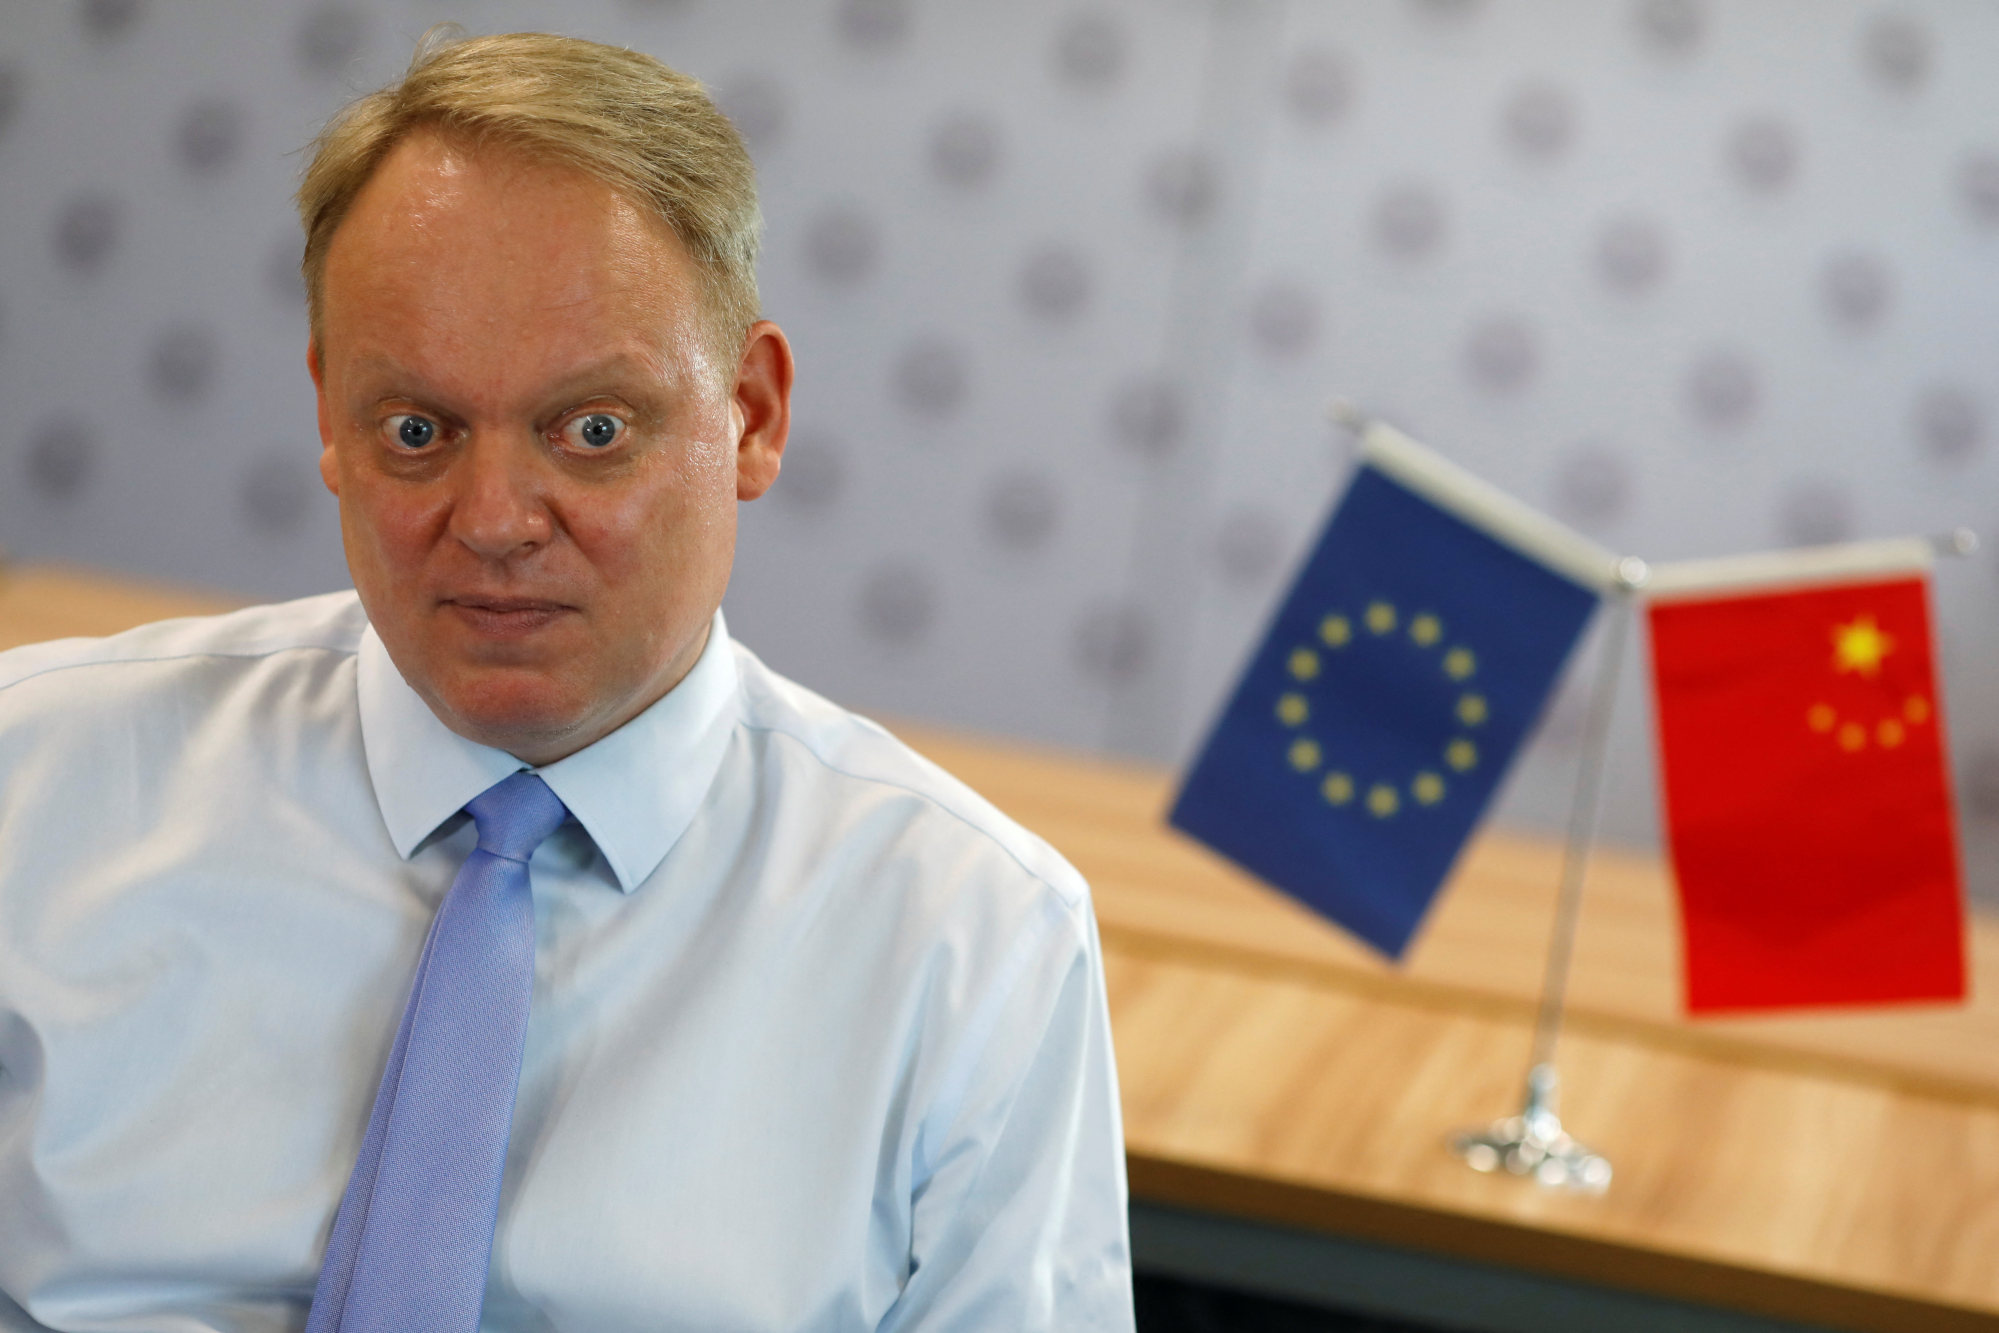 Jens Eskelund, a Danish national, is president of the EU’s chamber of commerce in China. Photo: Reuters